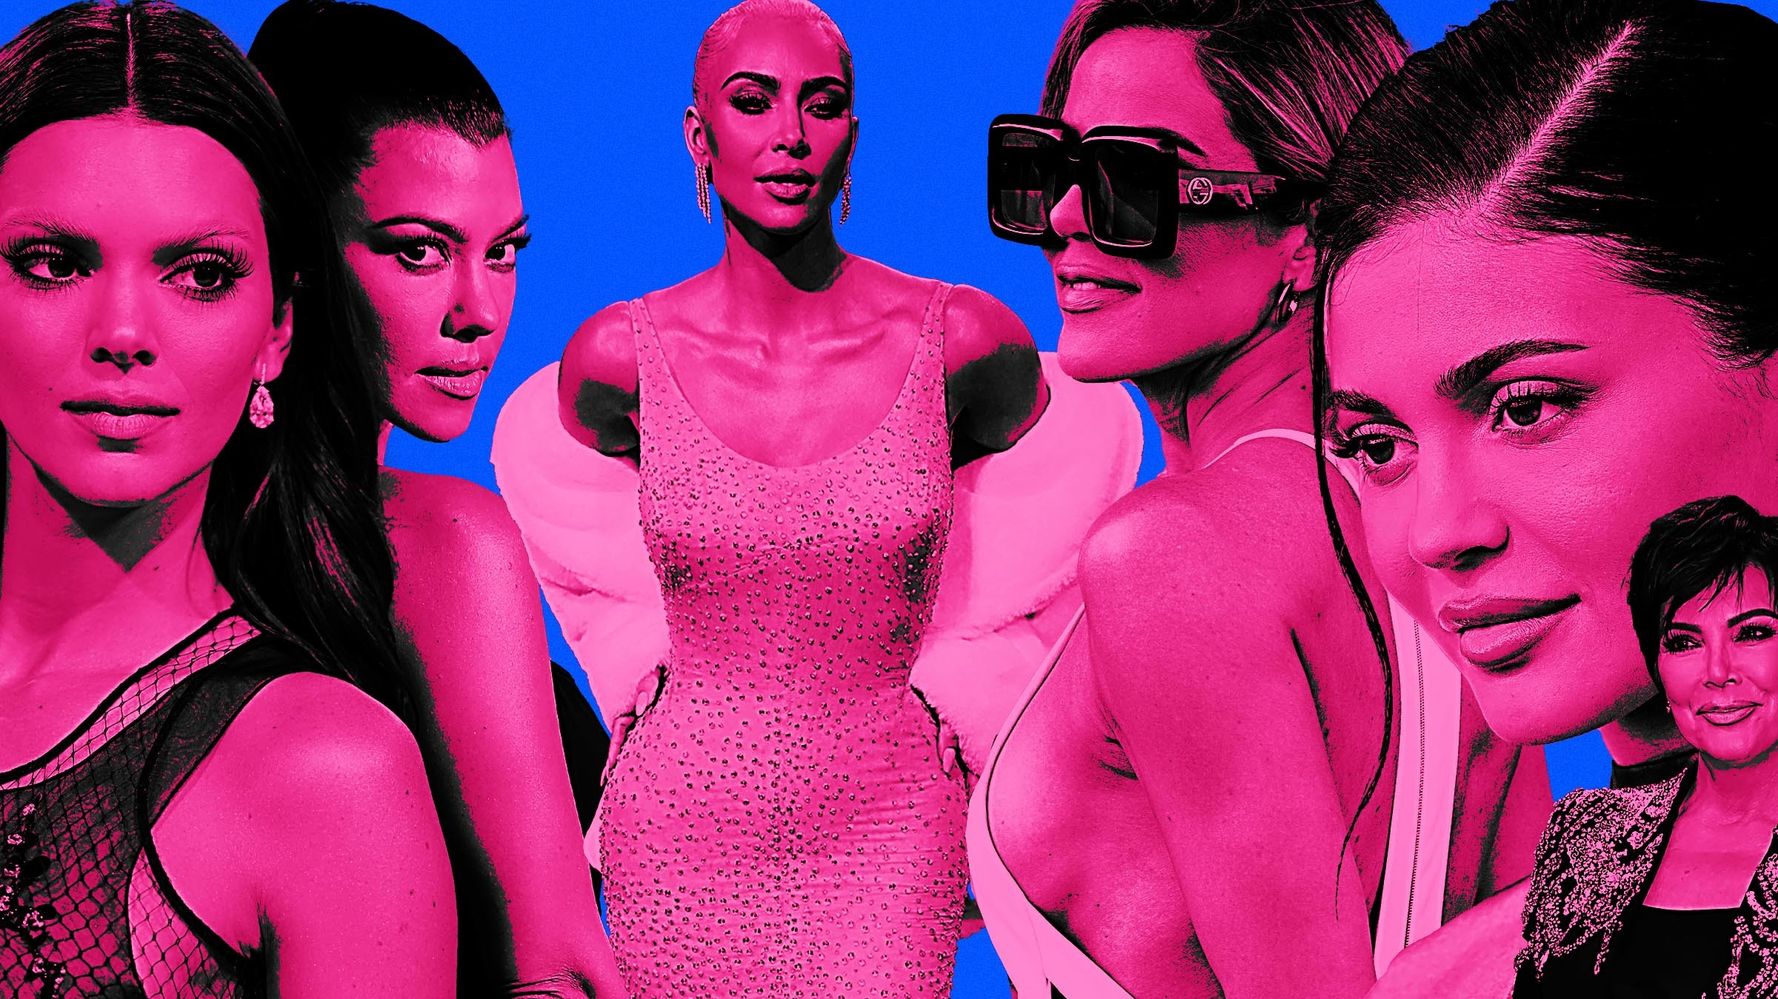 Kim Kardashian on How She Teachers Her Daughters About Body Confidence